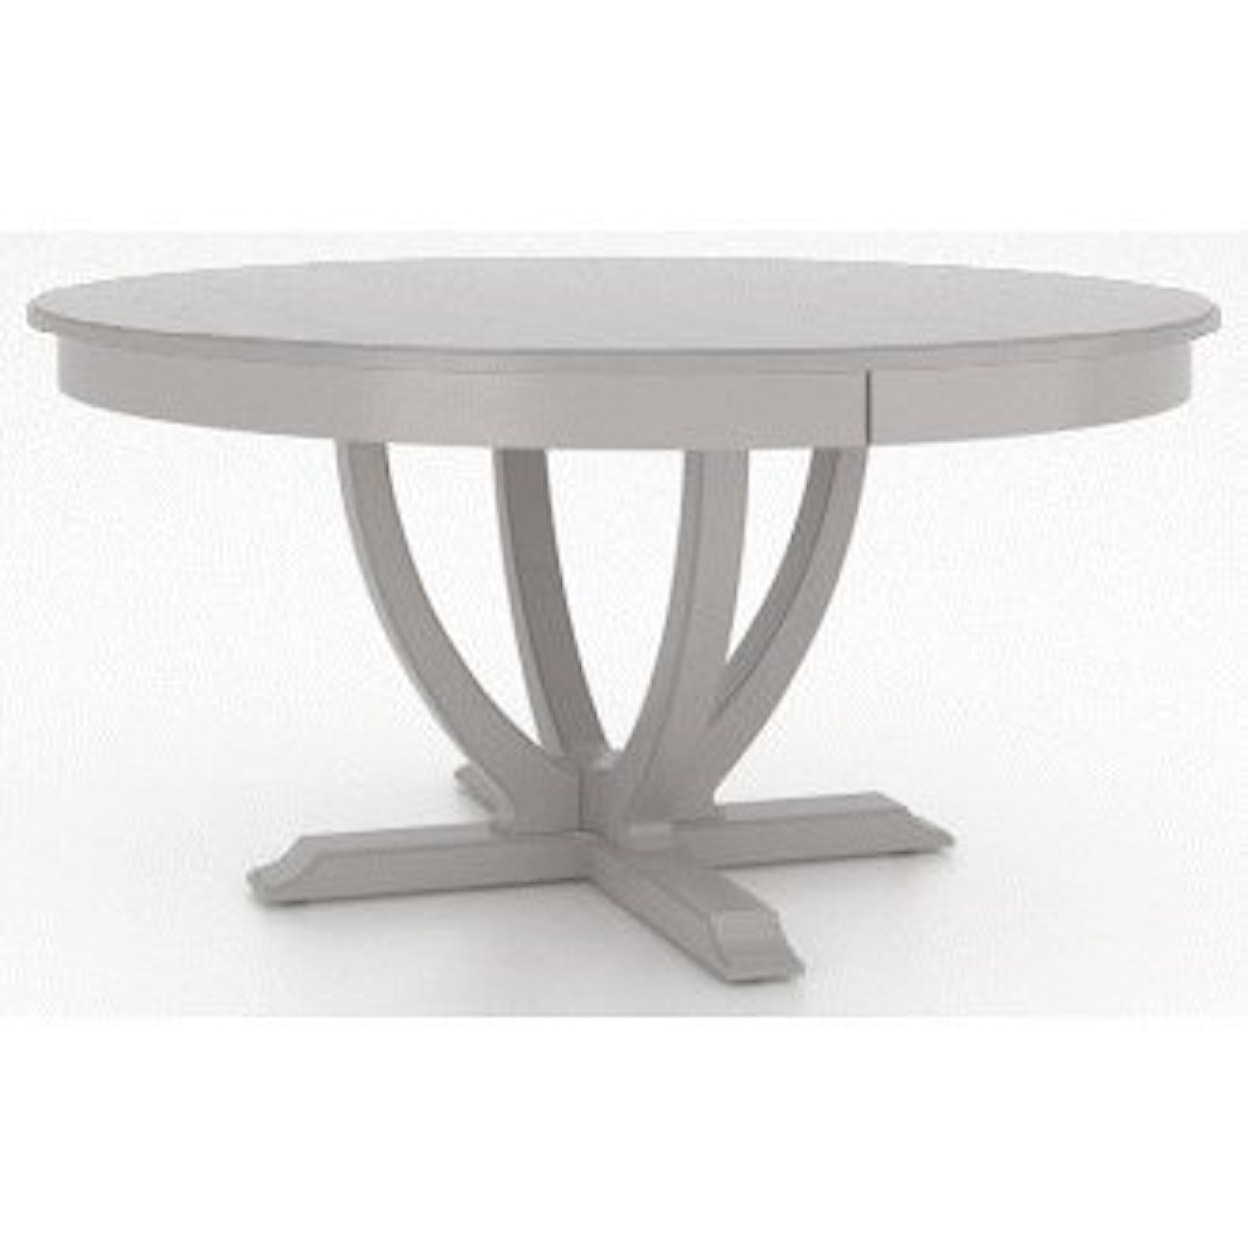 Canadel Canadel Round Dining Table Set